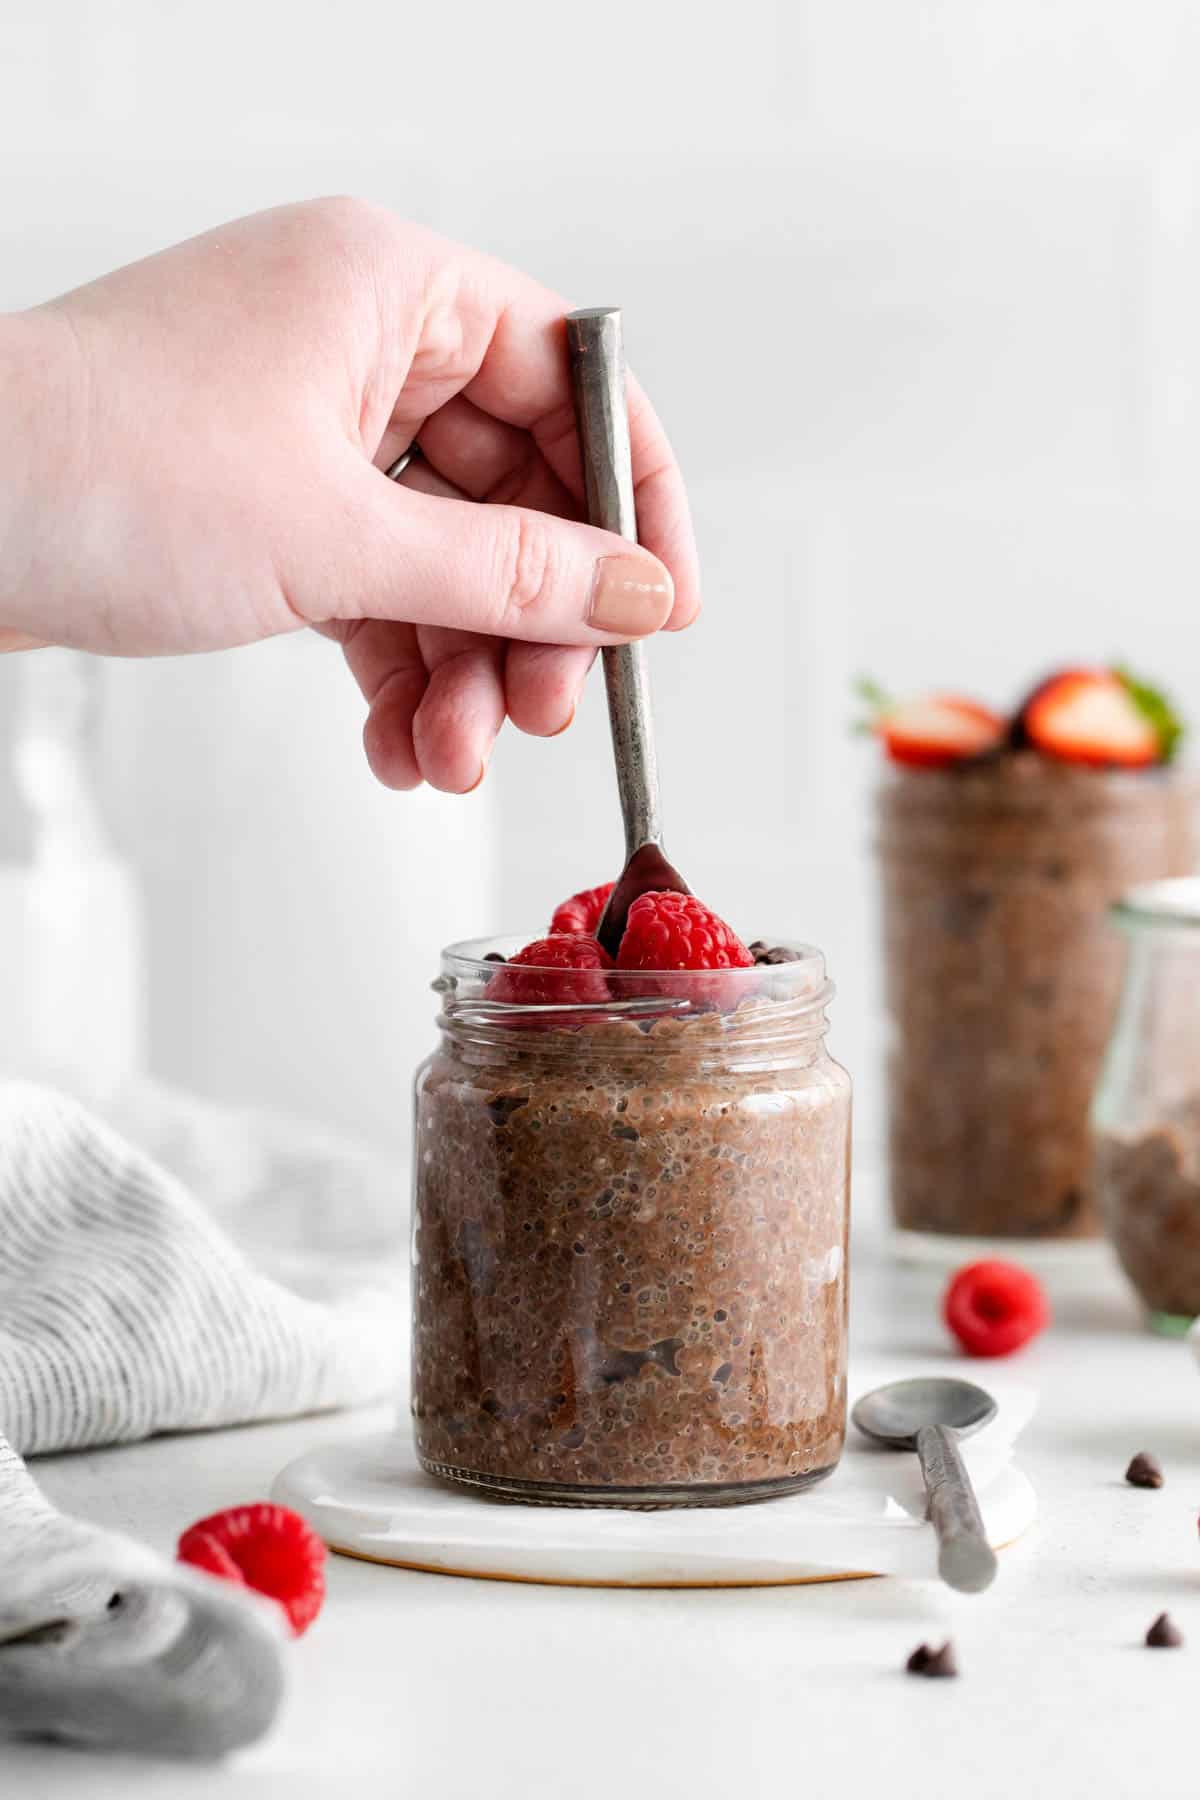 A hand holding a spoon scooping chocolate chia pudding from a jar.